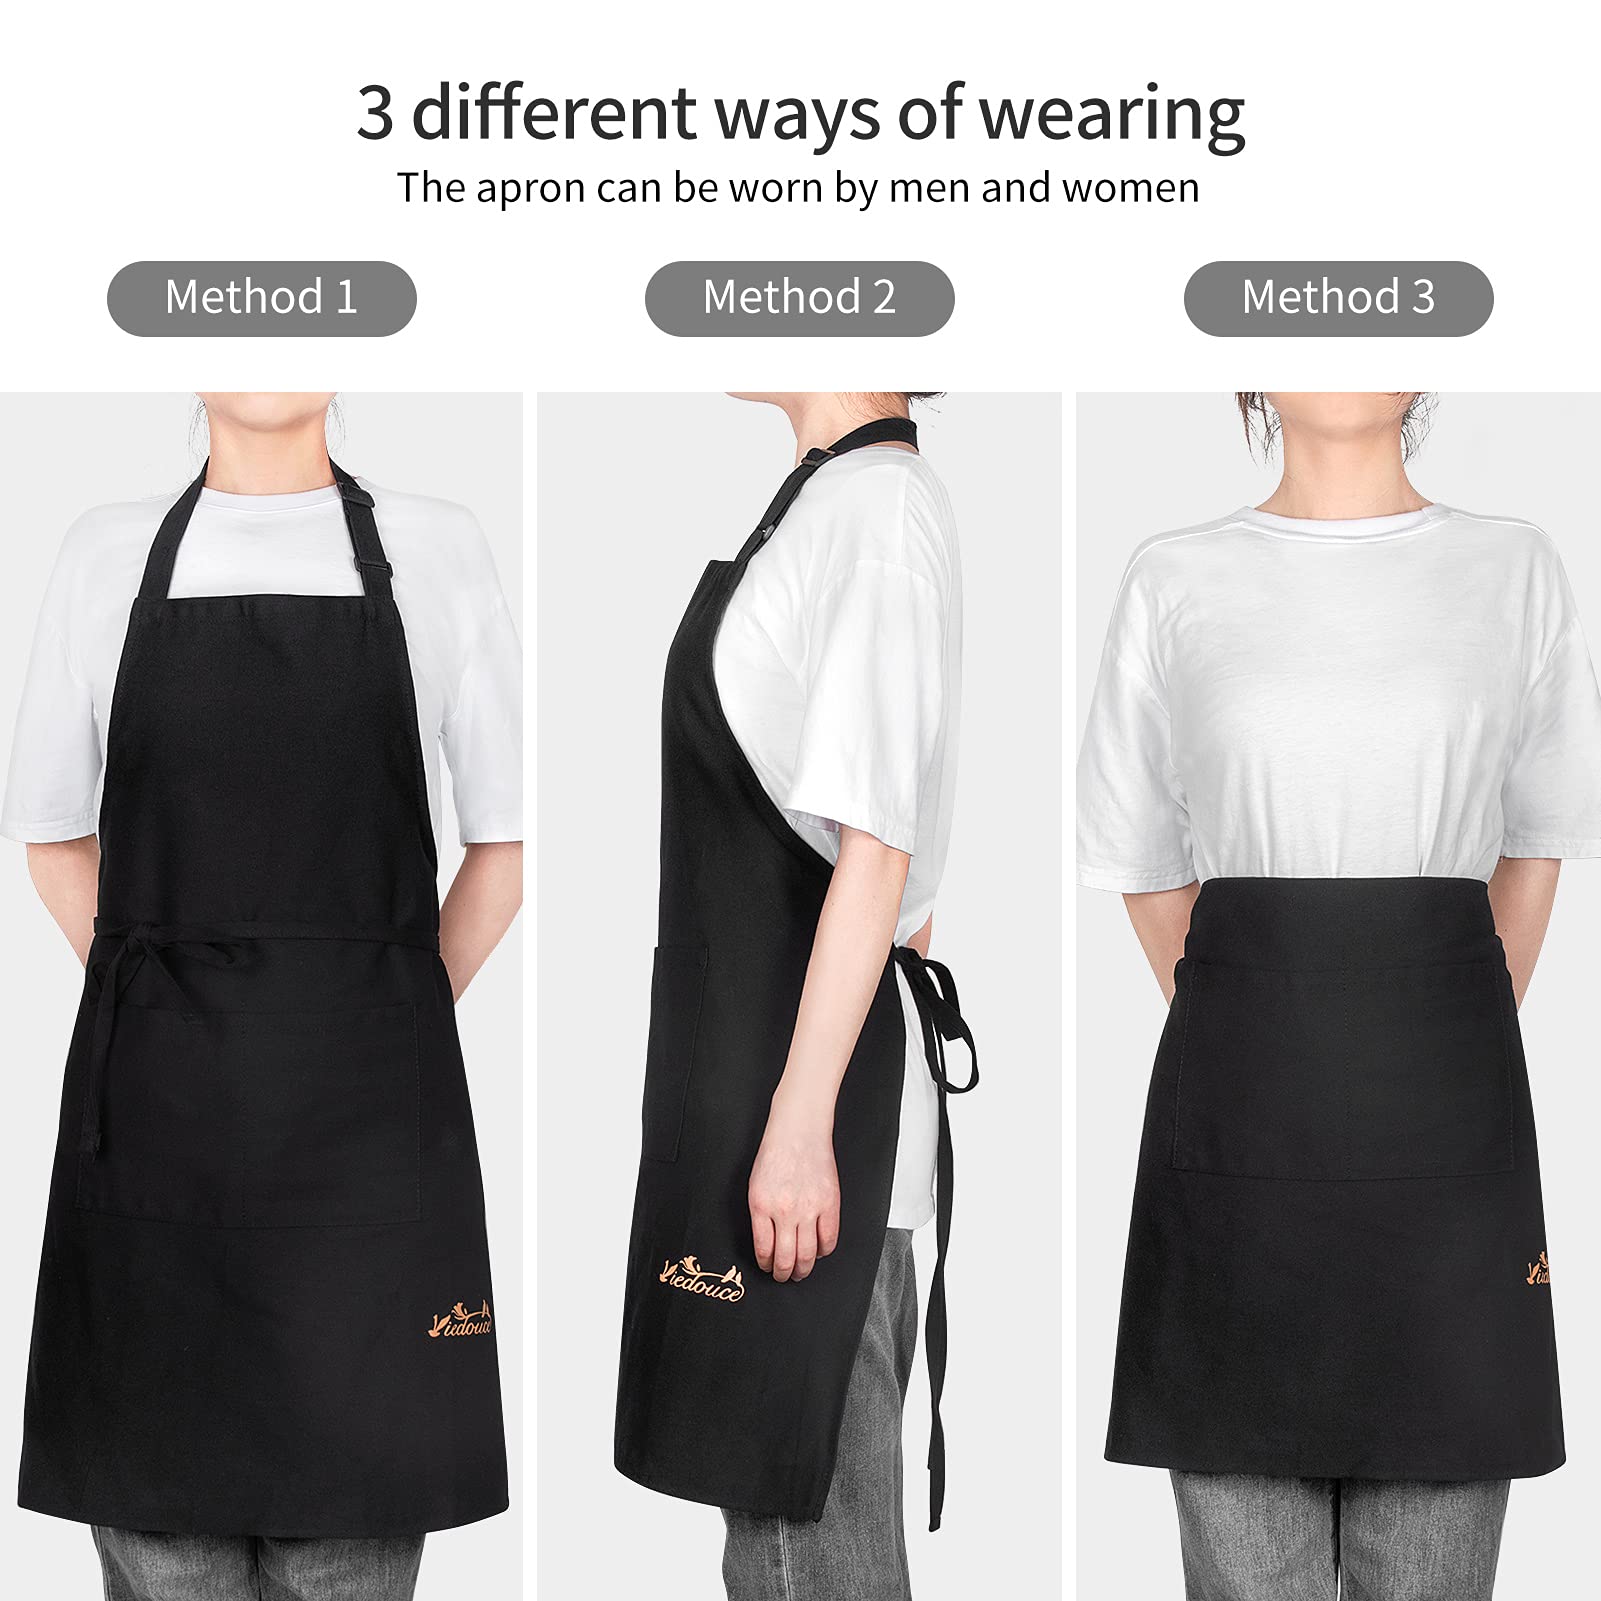 Viedouce 2 Packs Aprons Cotton,Cooking Kitchen Aprons,Adjustable Chef Apron with Pockets for Men Women,Black Aprons for Restaurant Garden Artist Garden BBQ,School,House